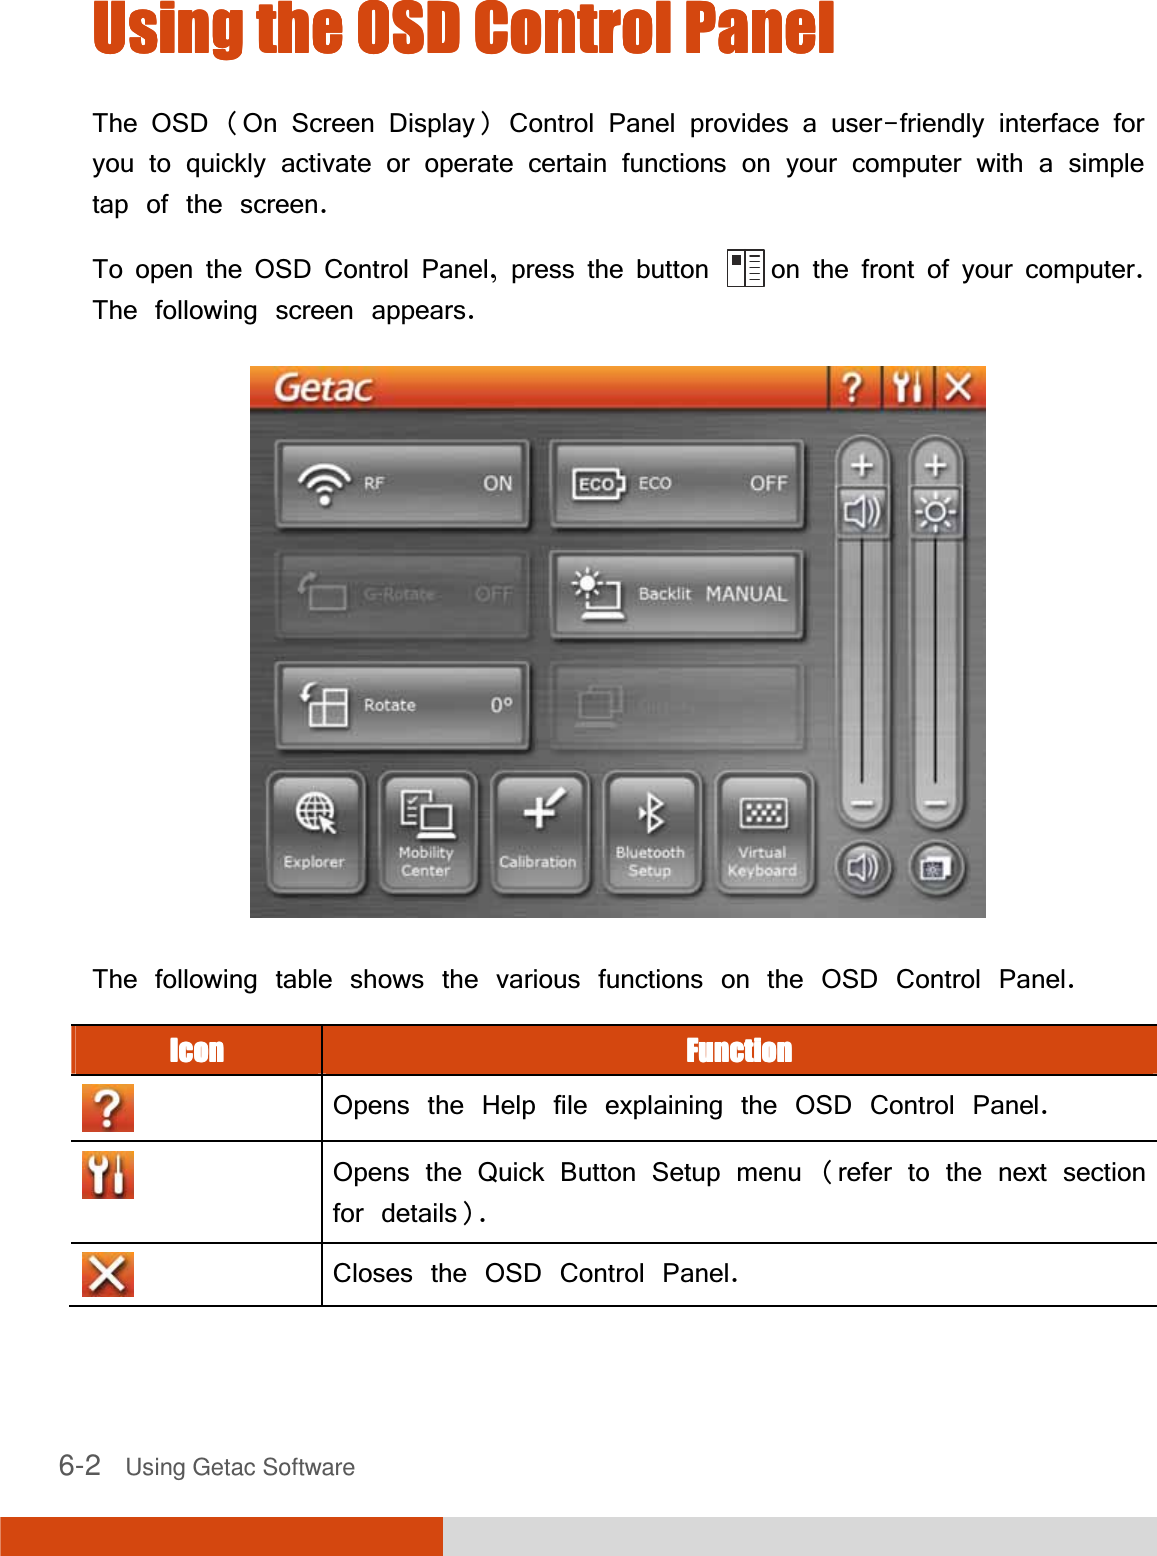 6-2   Using Getac Software Using the OSD Control PanelUsing the OSD Control PanelUsing the OSD Control PanelUsing the OSD Control Panel    The OSD (On Screen Display) Control Panel provides a user-friendly interface for you to quickly activate or operate certain functions on your computer with a simple tap of the screen. To open the OSD Control Panel, press the button      on the front of your computer. The following screen appears.  The following table shows the various functions on the OSD Control Panel. IconIconIconIcon    FunctionFunctionFunctionFunction    Opens the Help file explaining the OSD Control Panel.  Opens the Quick Button Setup menu (refer to the next section for details).  Closes the OSD Control Panel. 